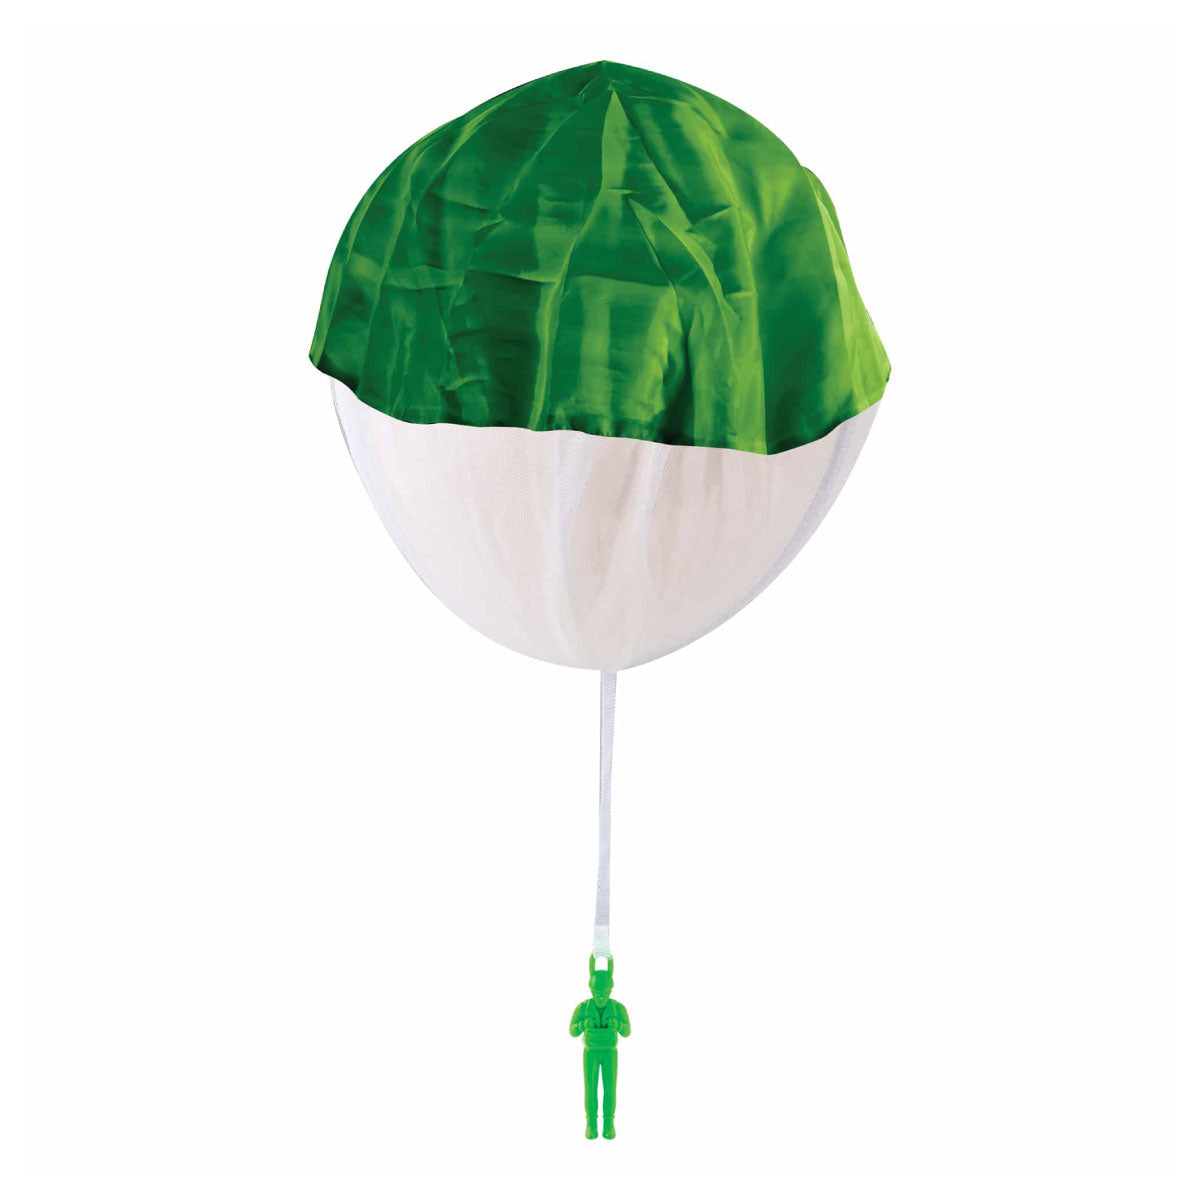 Retro Paratrooper from Schylling